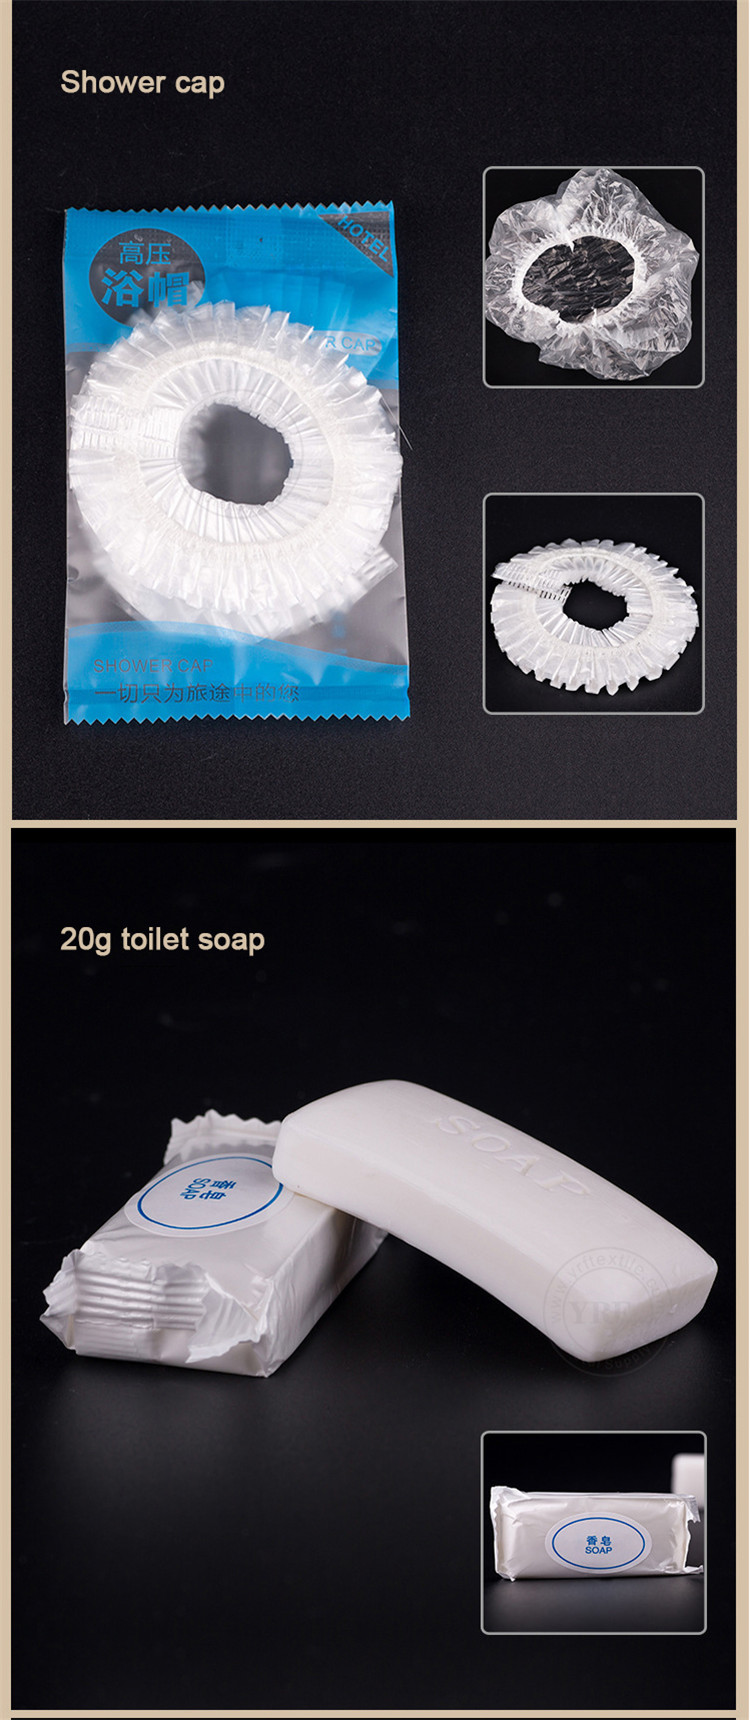 Wrapped Round Hotel Soap Amenities